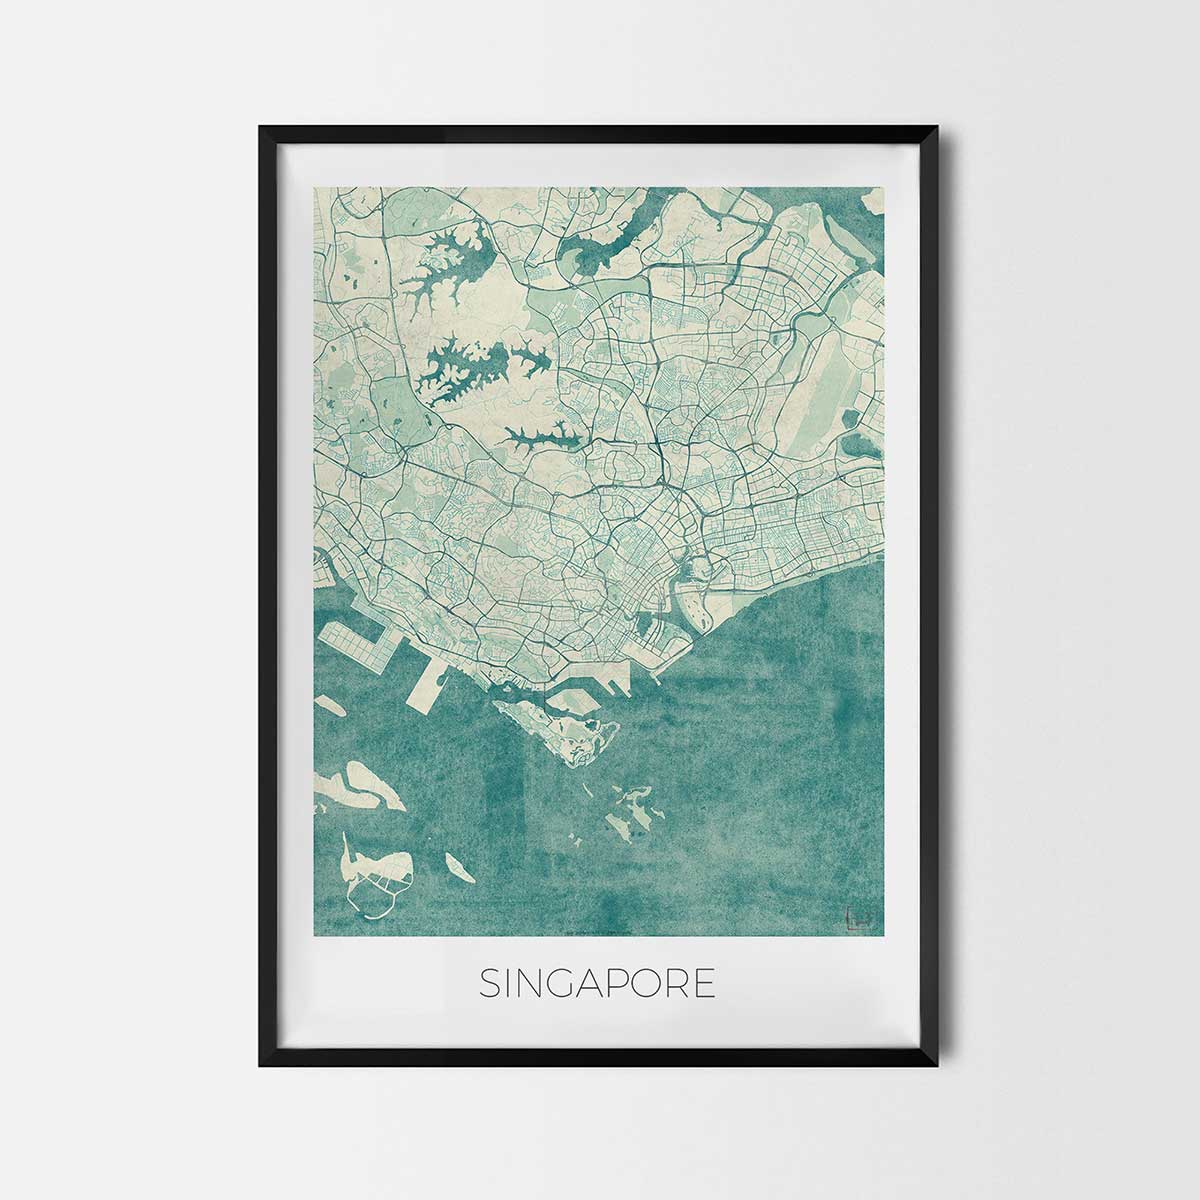 Singapore art posters city map art posters map posters city art prints city posters